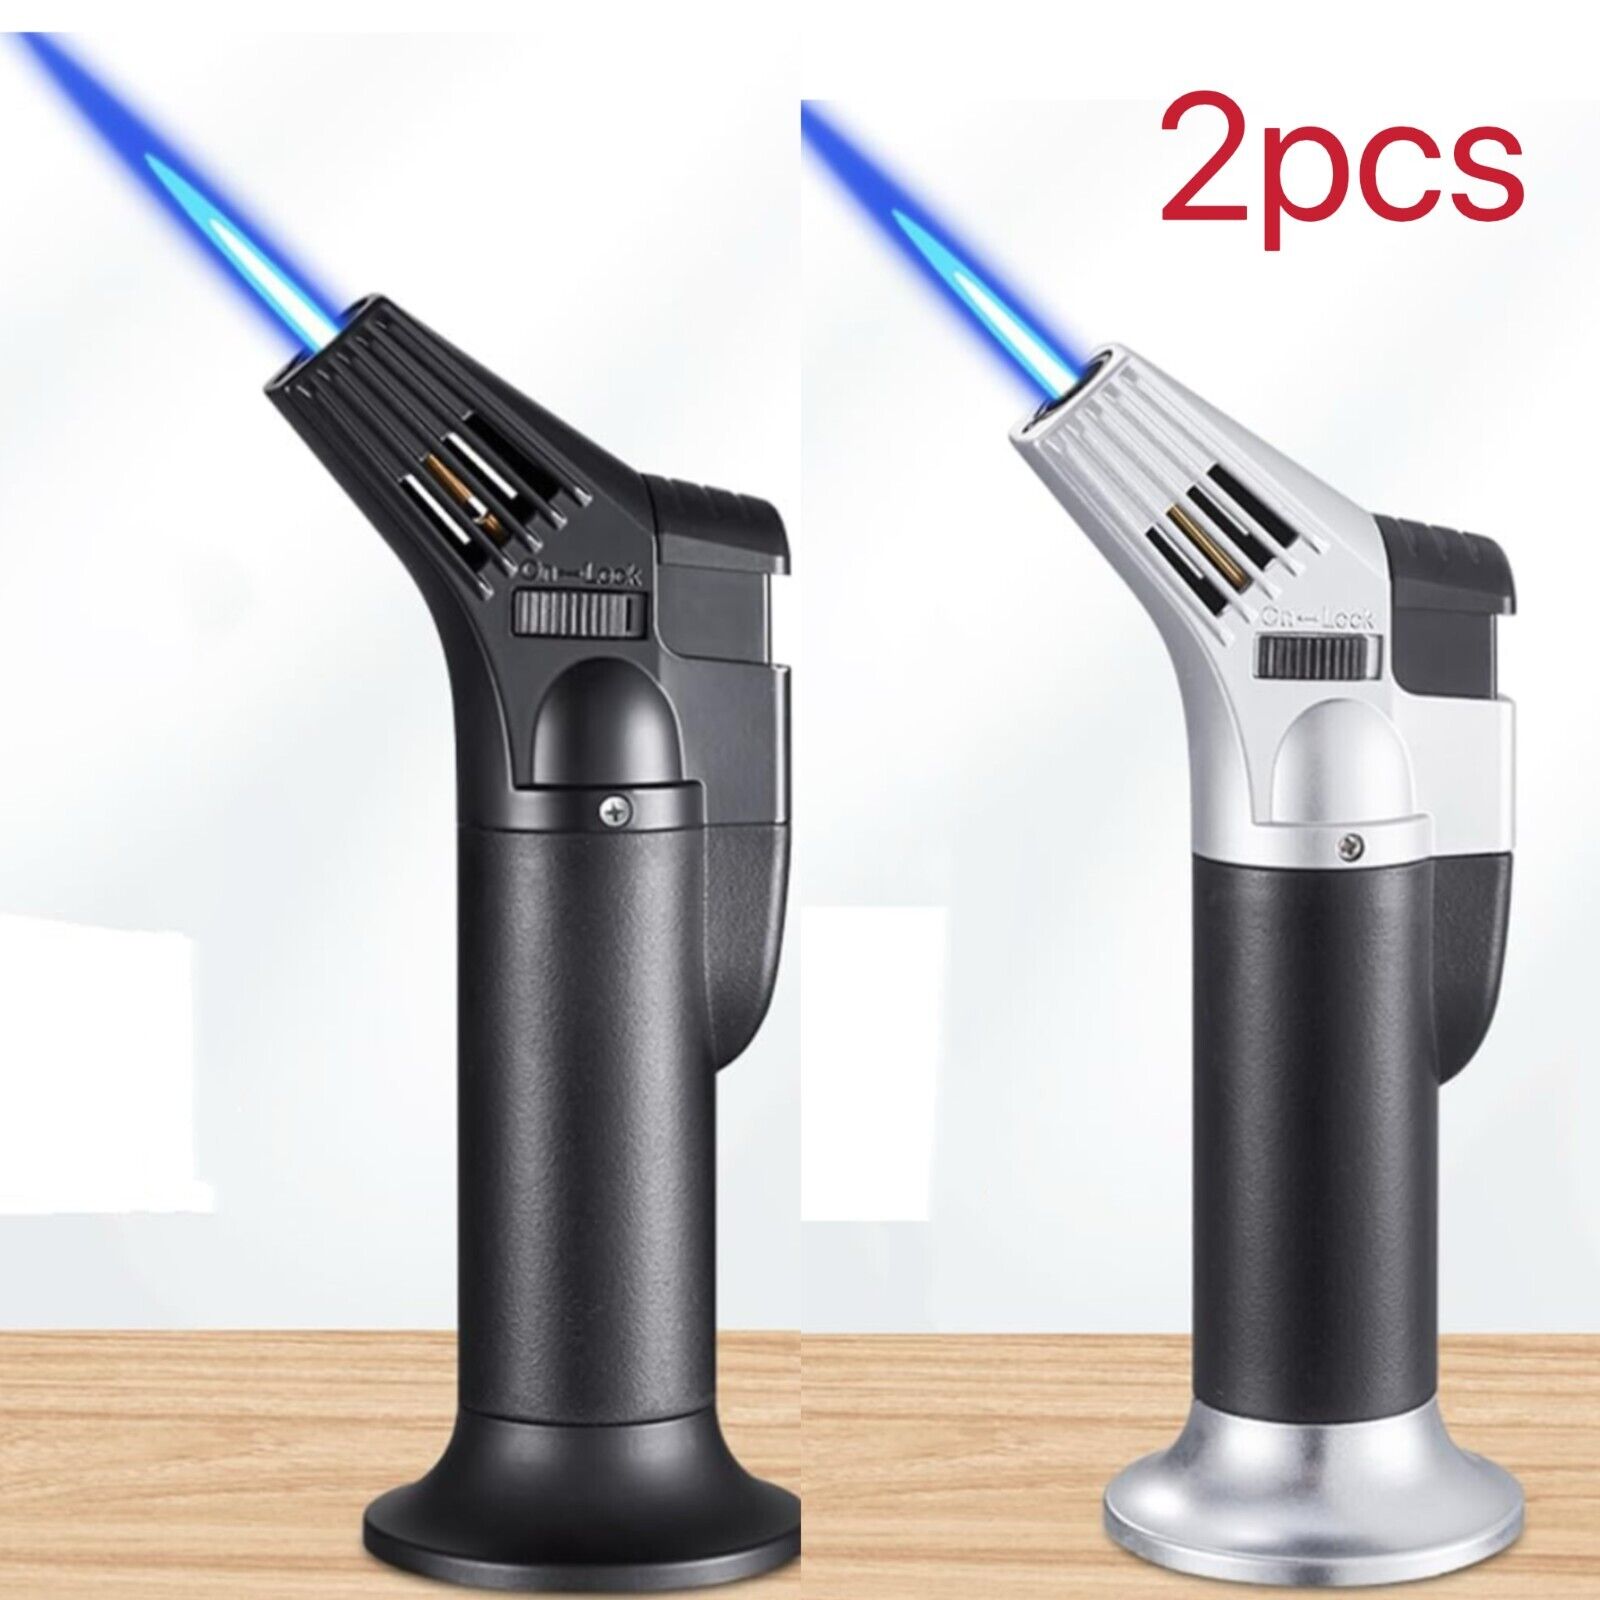 2PCS Refillable Culinary Cooking Torch Kitchen Blow Torch Lighter